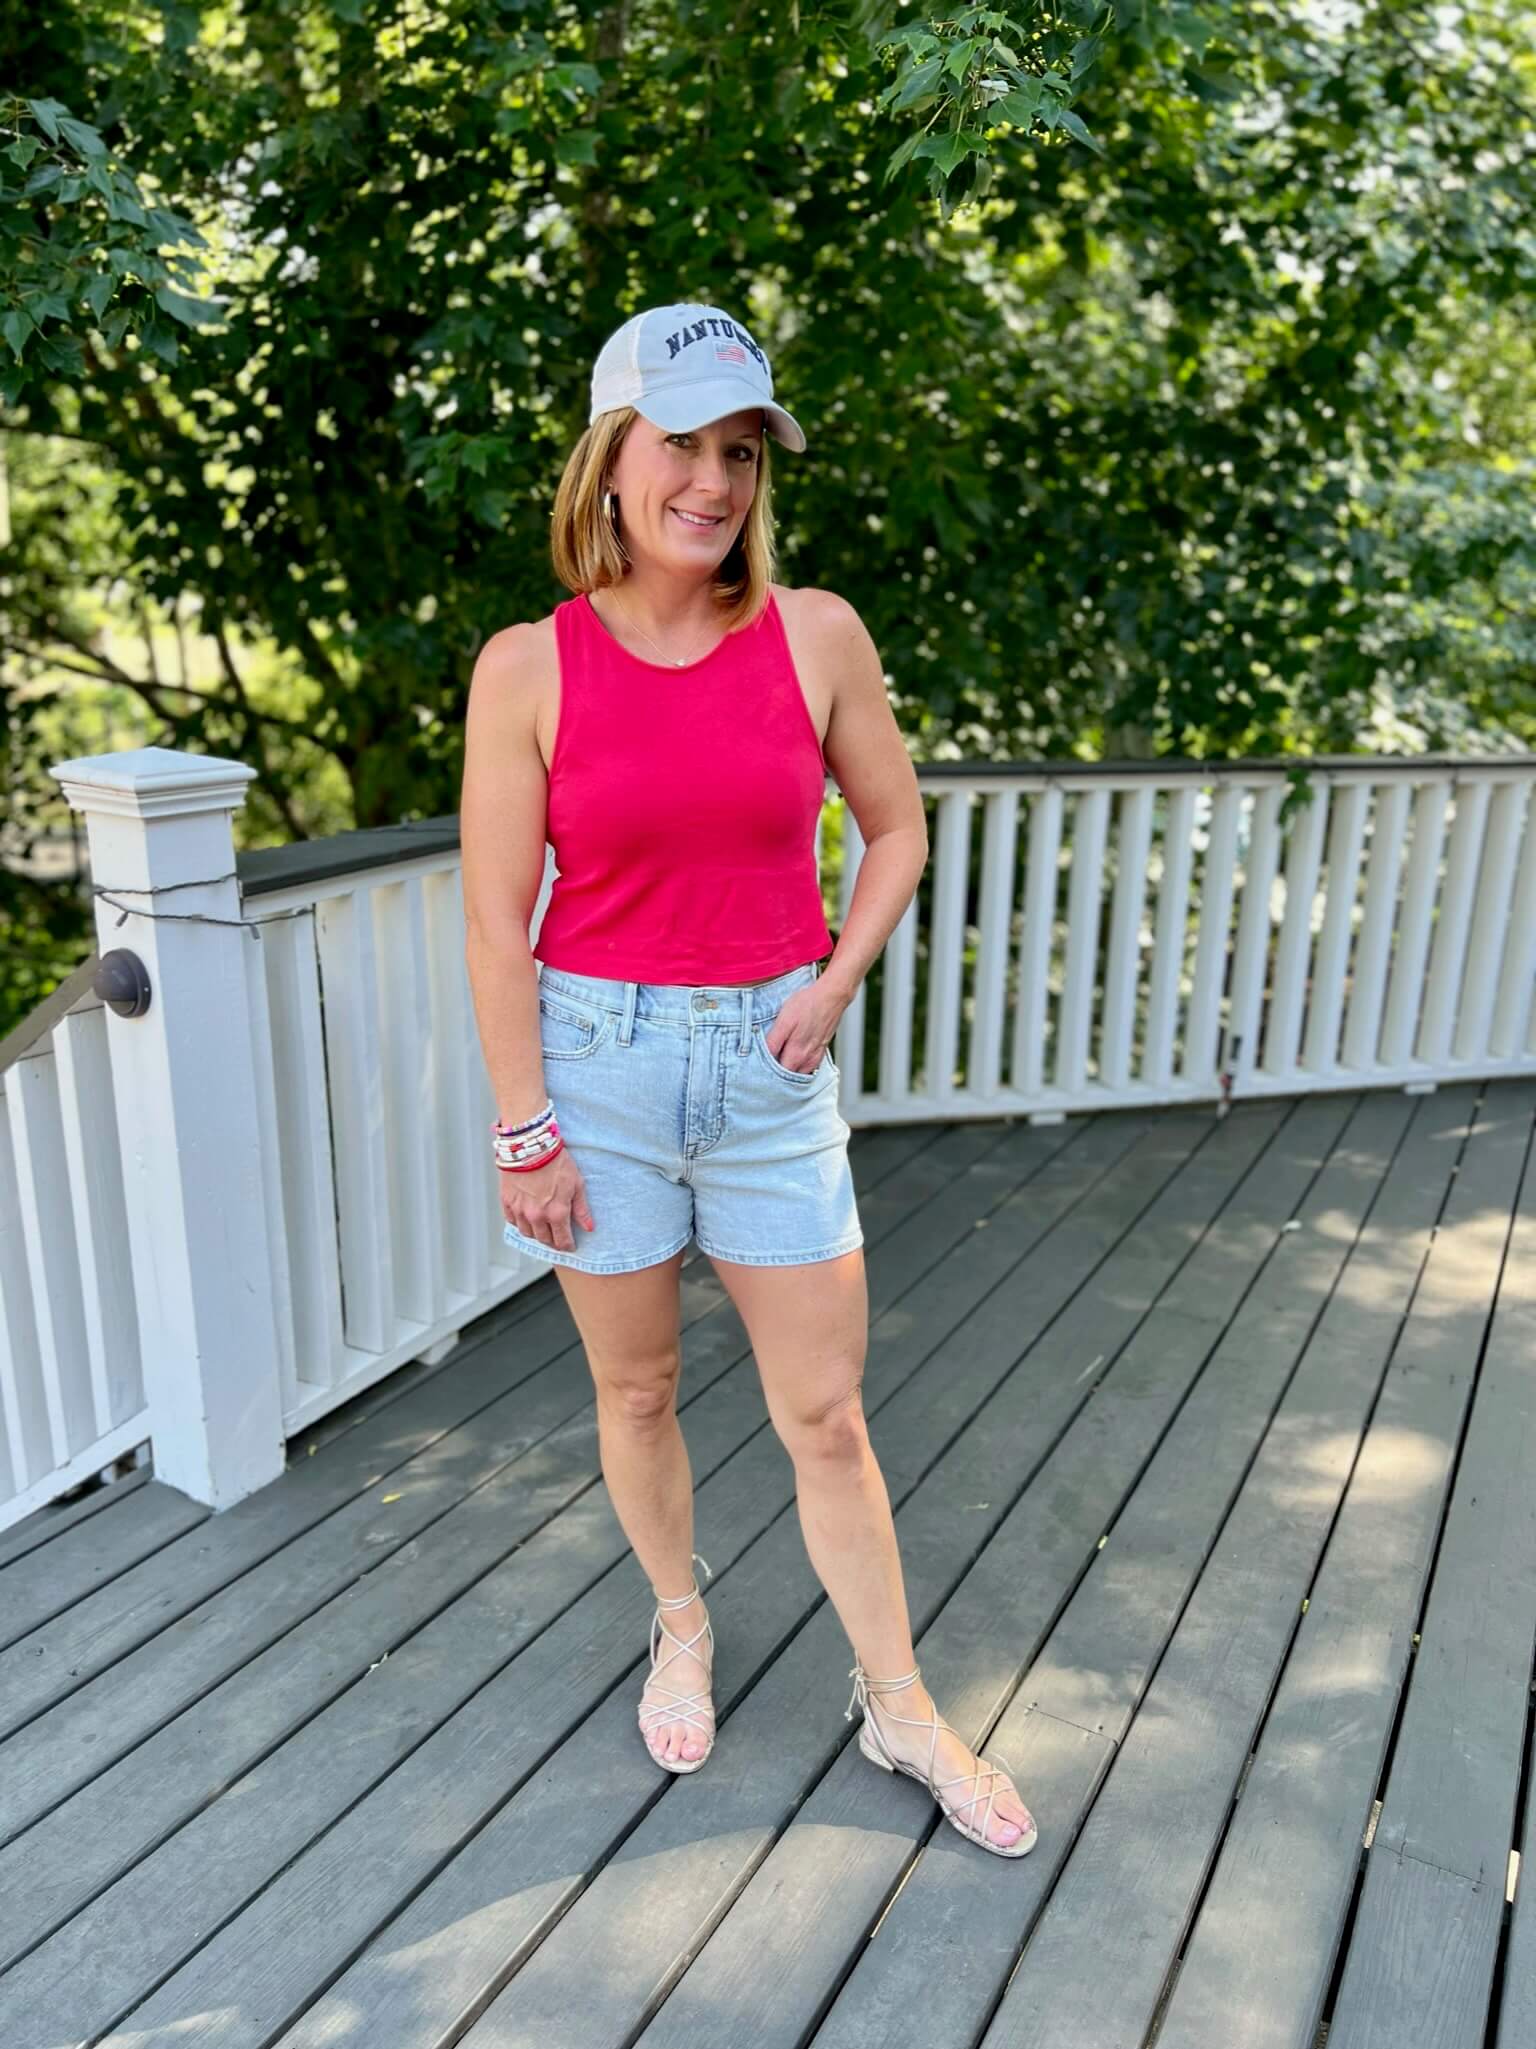 How To Look Festive For July 4th Pink Halter Top & Jean Shorts how to style a baseball hat how to wear jean shorts in your 40s how to style jean shorts in your 30 what to wear for July 4th